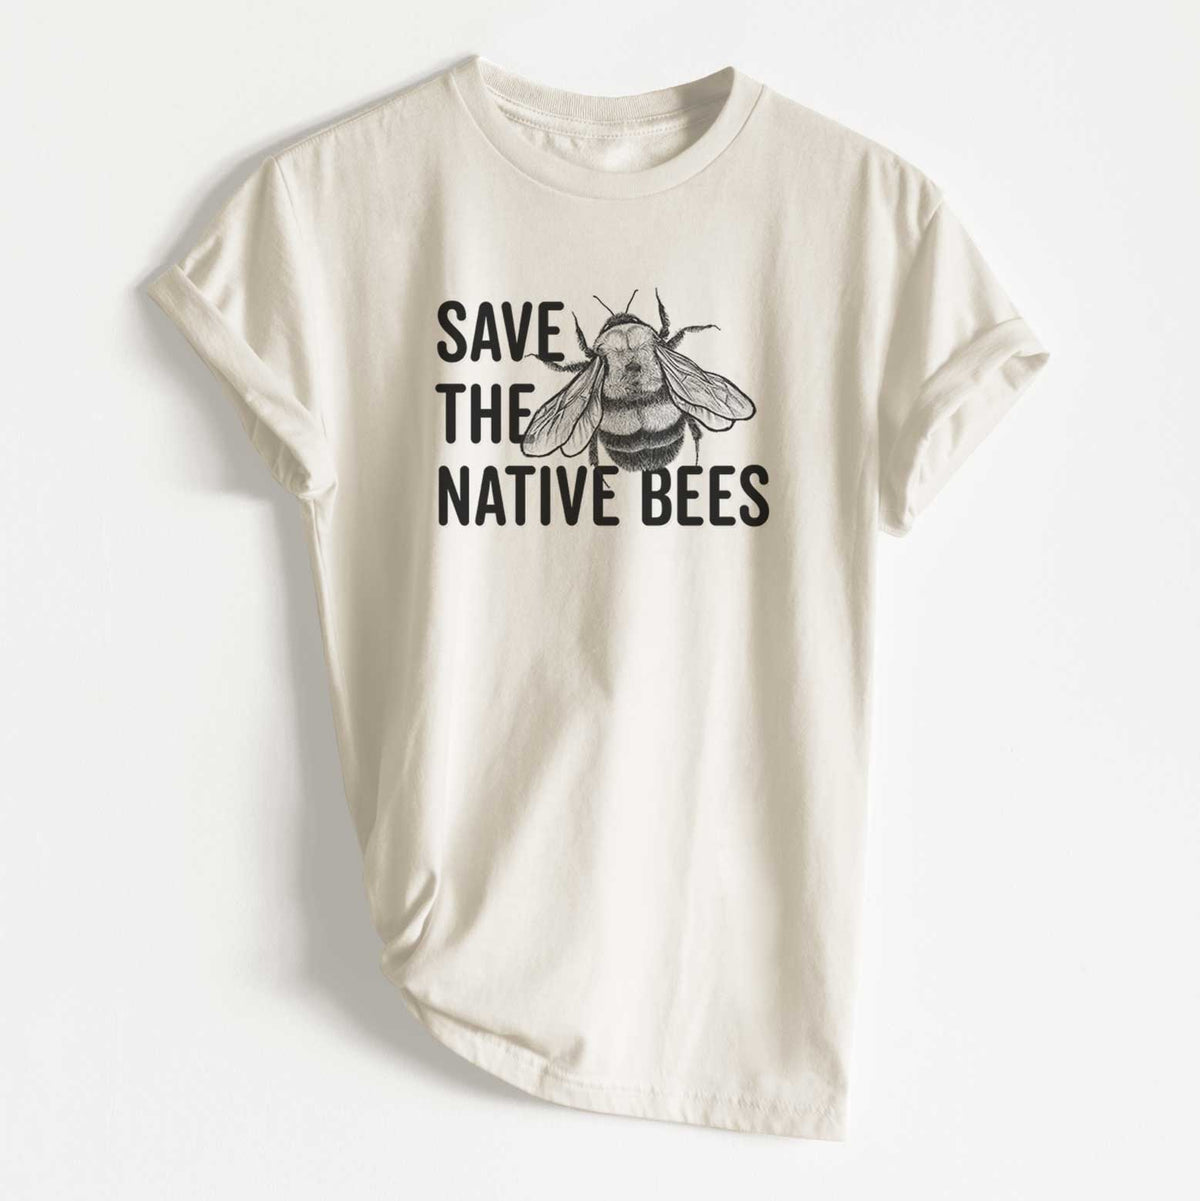 Save the Native Bees - Unisex Recycled Eco Tee  - CLOSEOUT - FINAL SALE